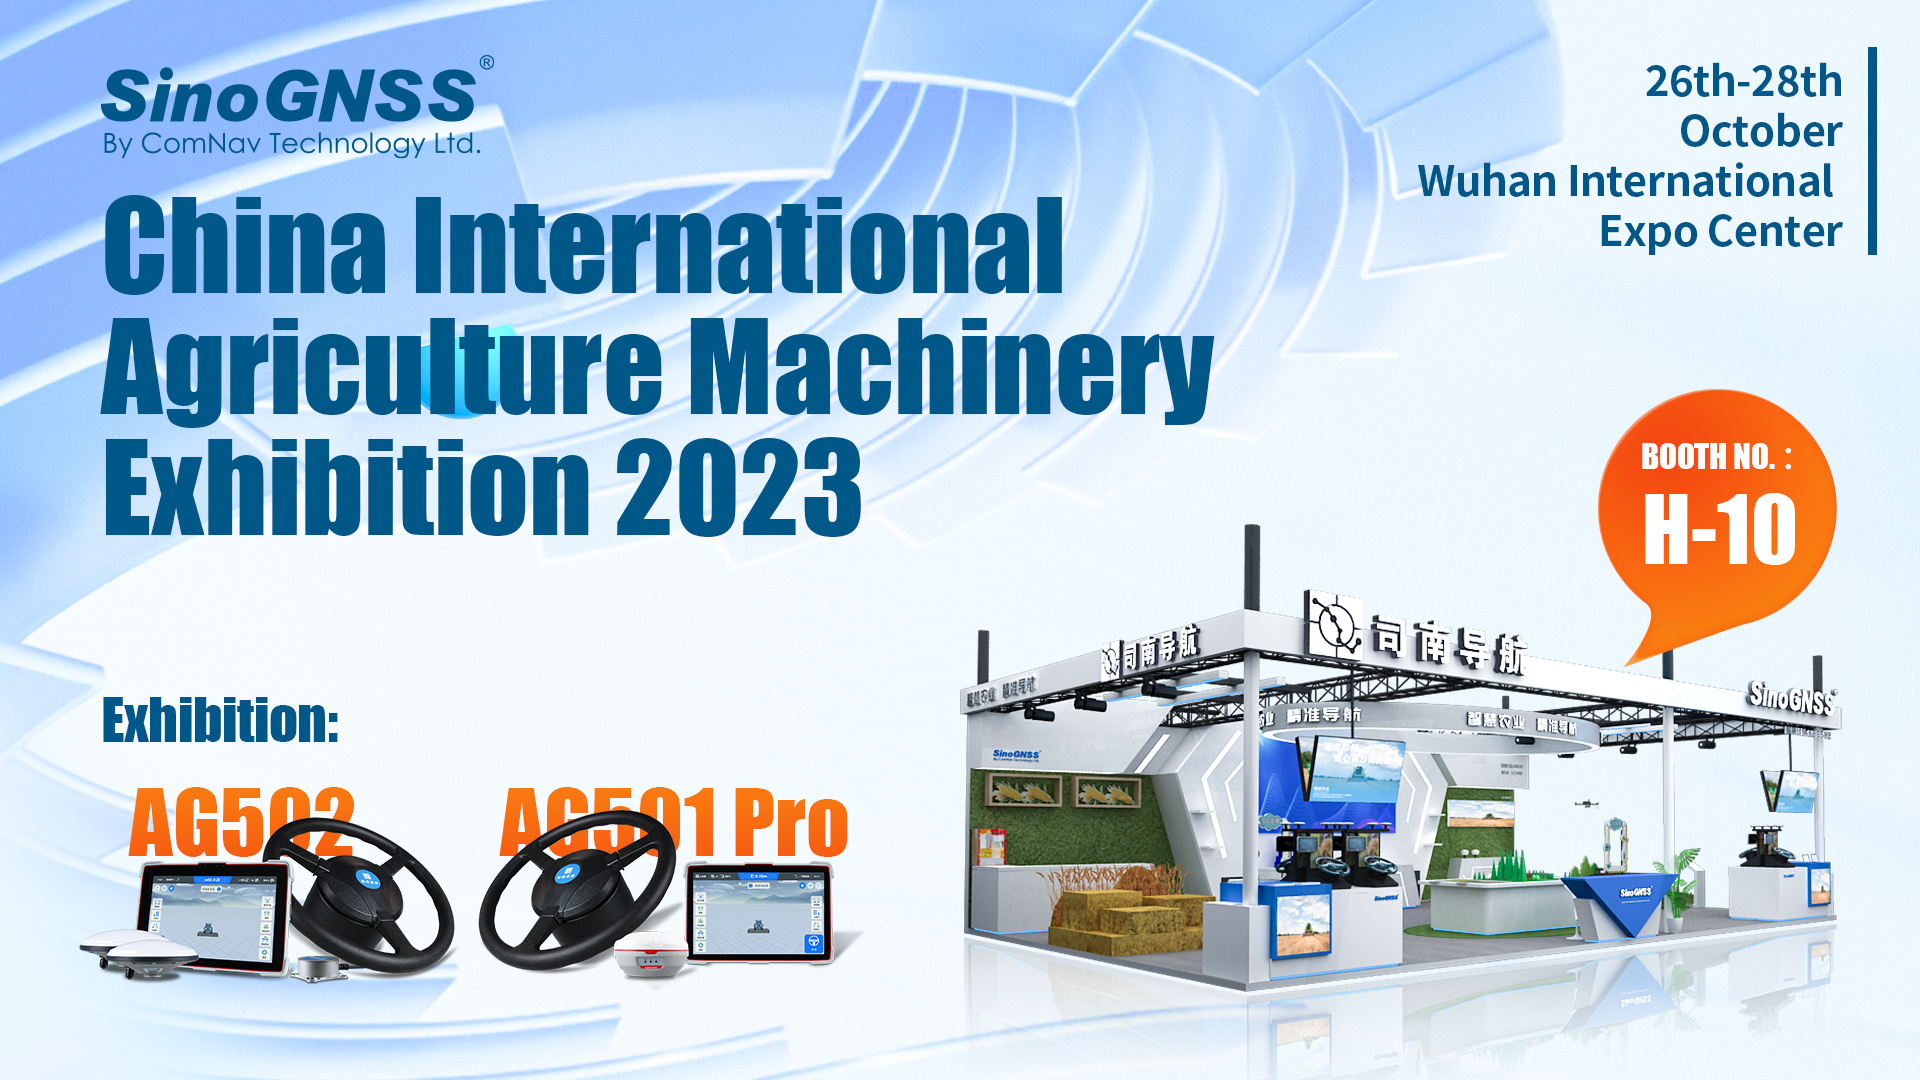 China International Agriculture Machinery Exhibition